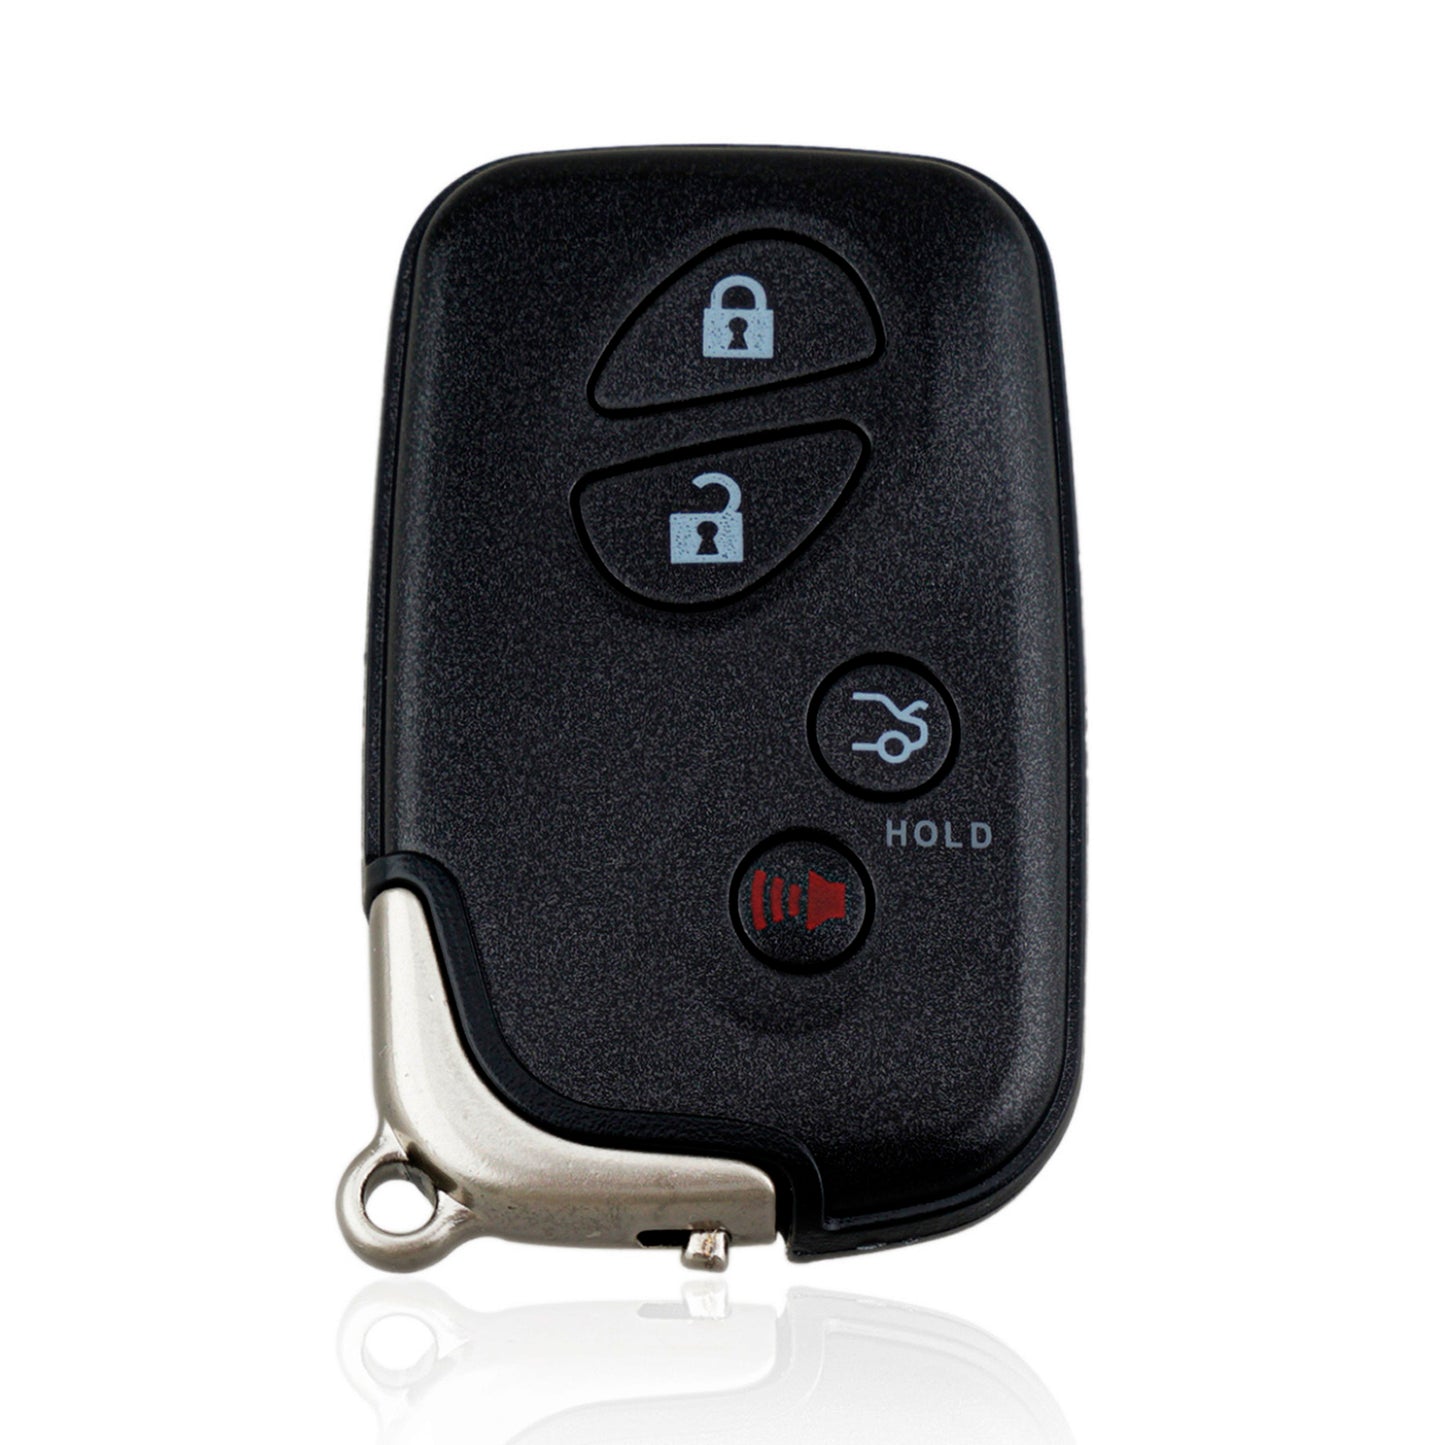 4 Buttons 315MHz Smart Prox Key Entry Car Fob Keyless Remote Key For 2005-2008 Lexus IS250 IS350 LS460 LS600h GS300 GS350 GS430 GS450h GS460 ES350 FCC: HYQ14AAB 0140 SKU : H526